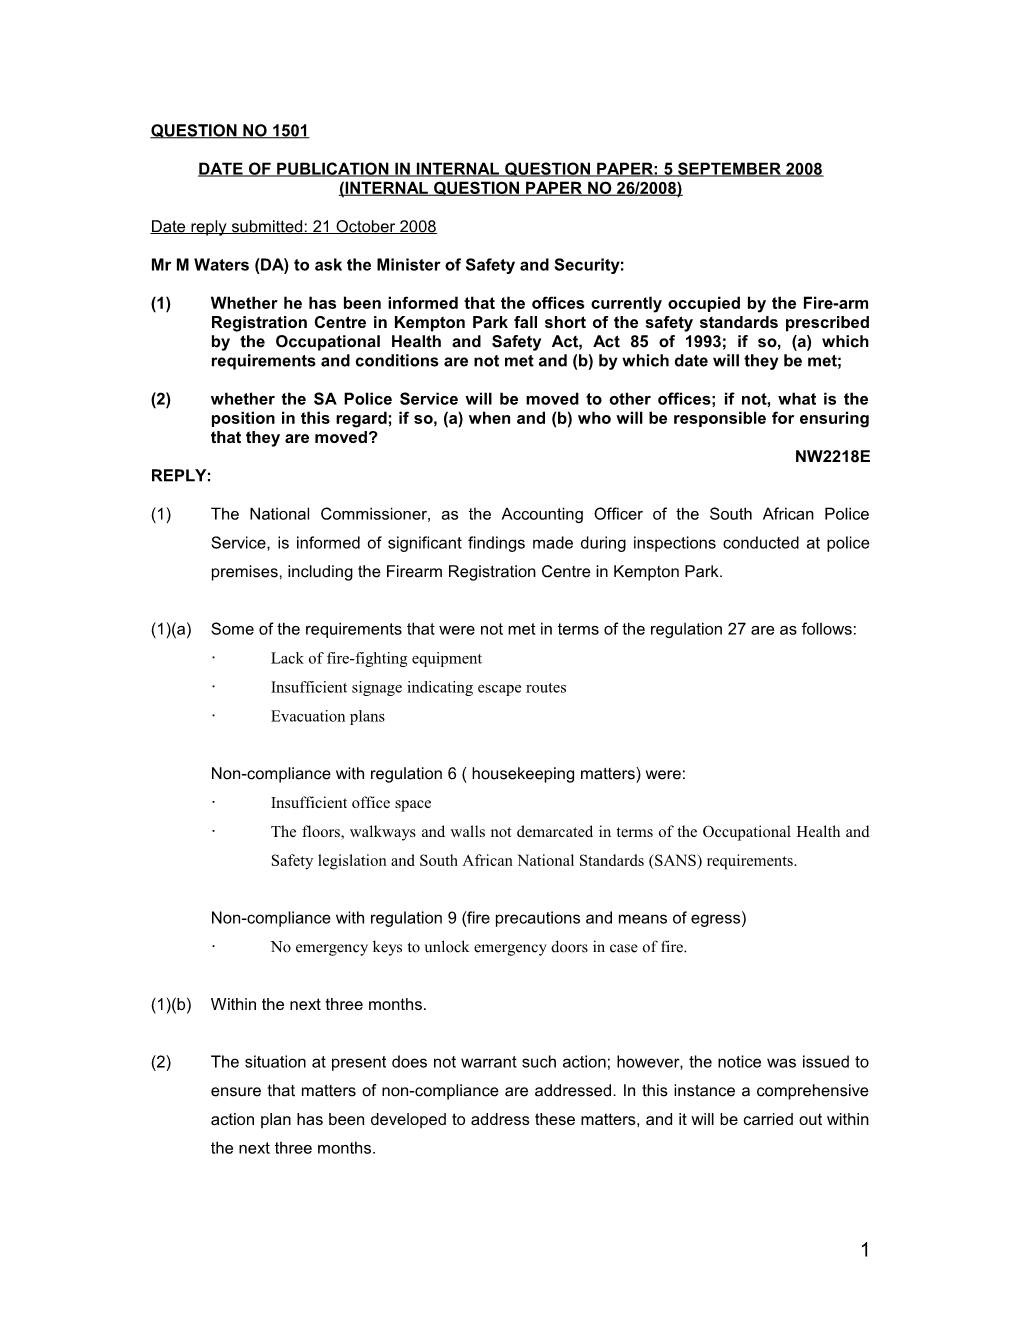 Date of Publication in Internal Question Paper: 5 September 2008